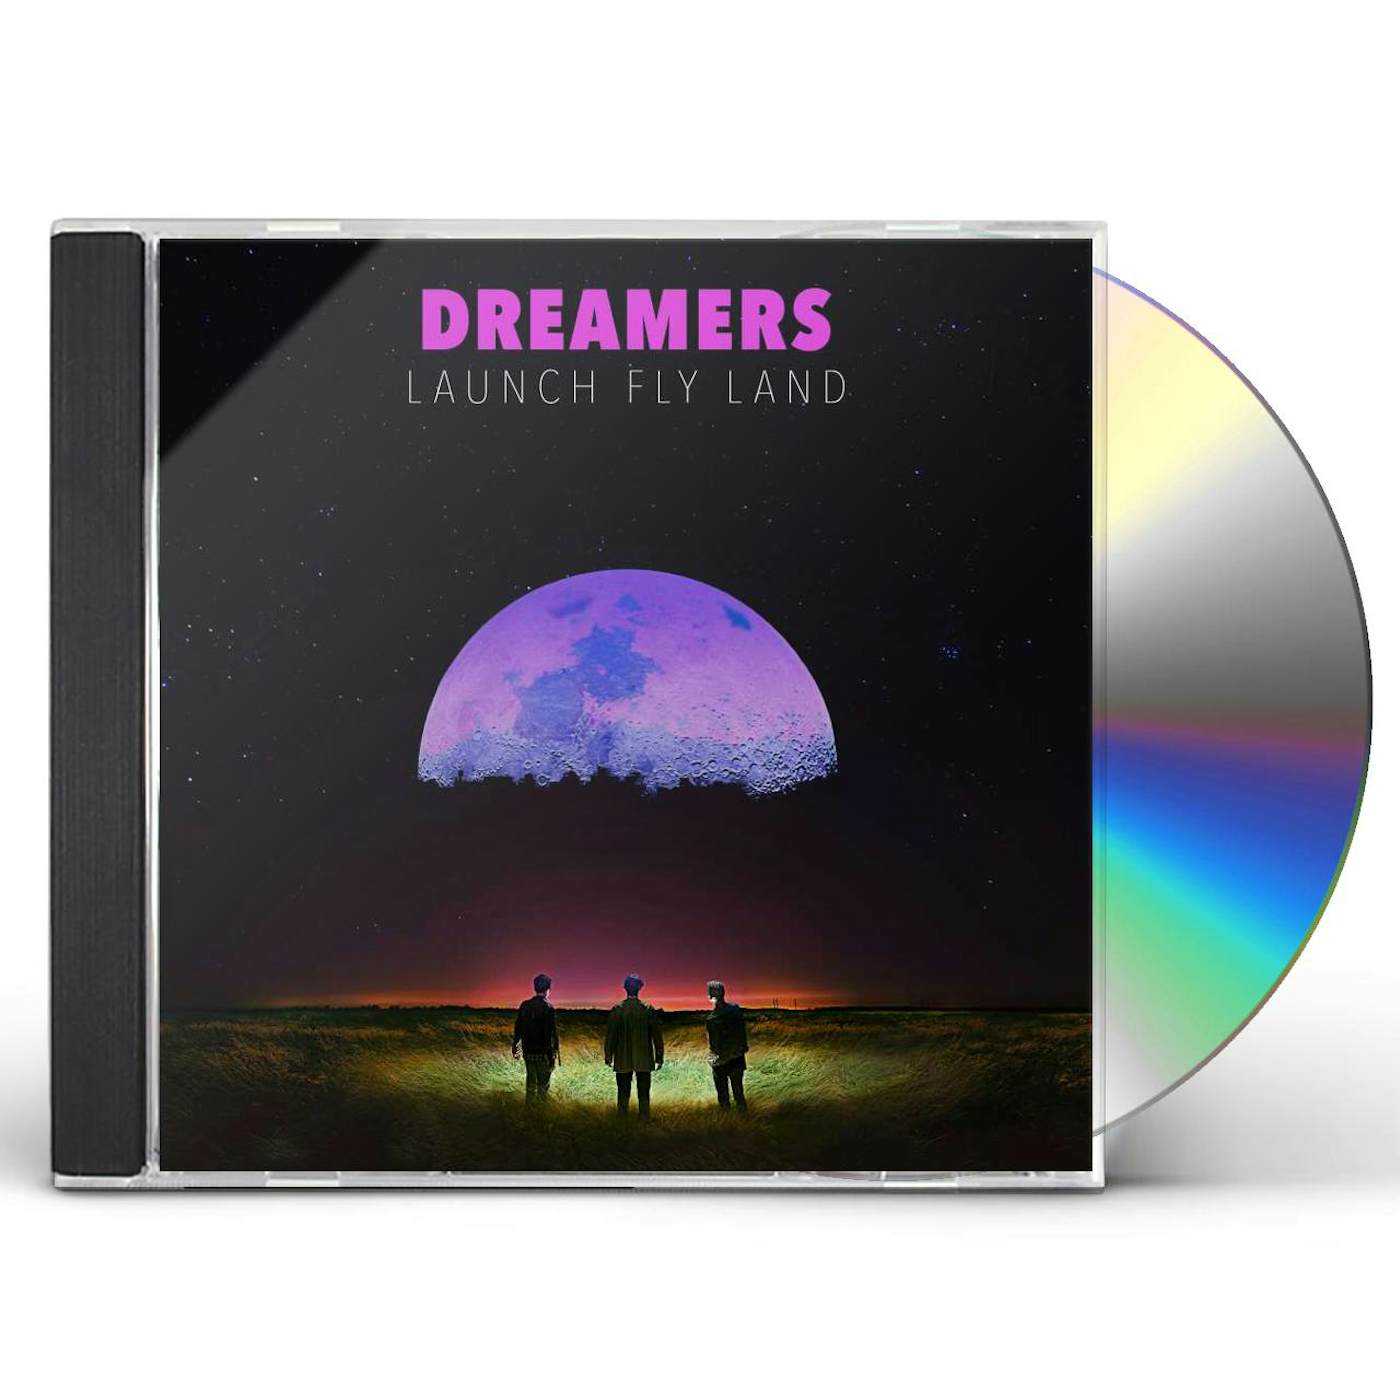 DREAMERS LAUNCH FLY LAND CD